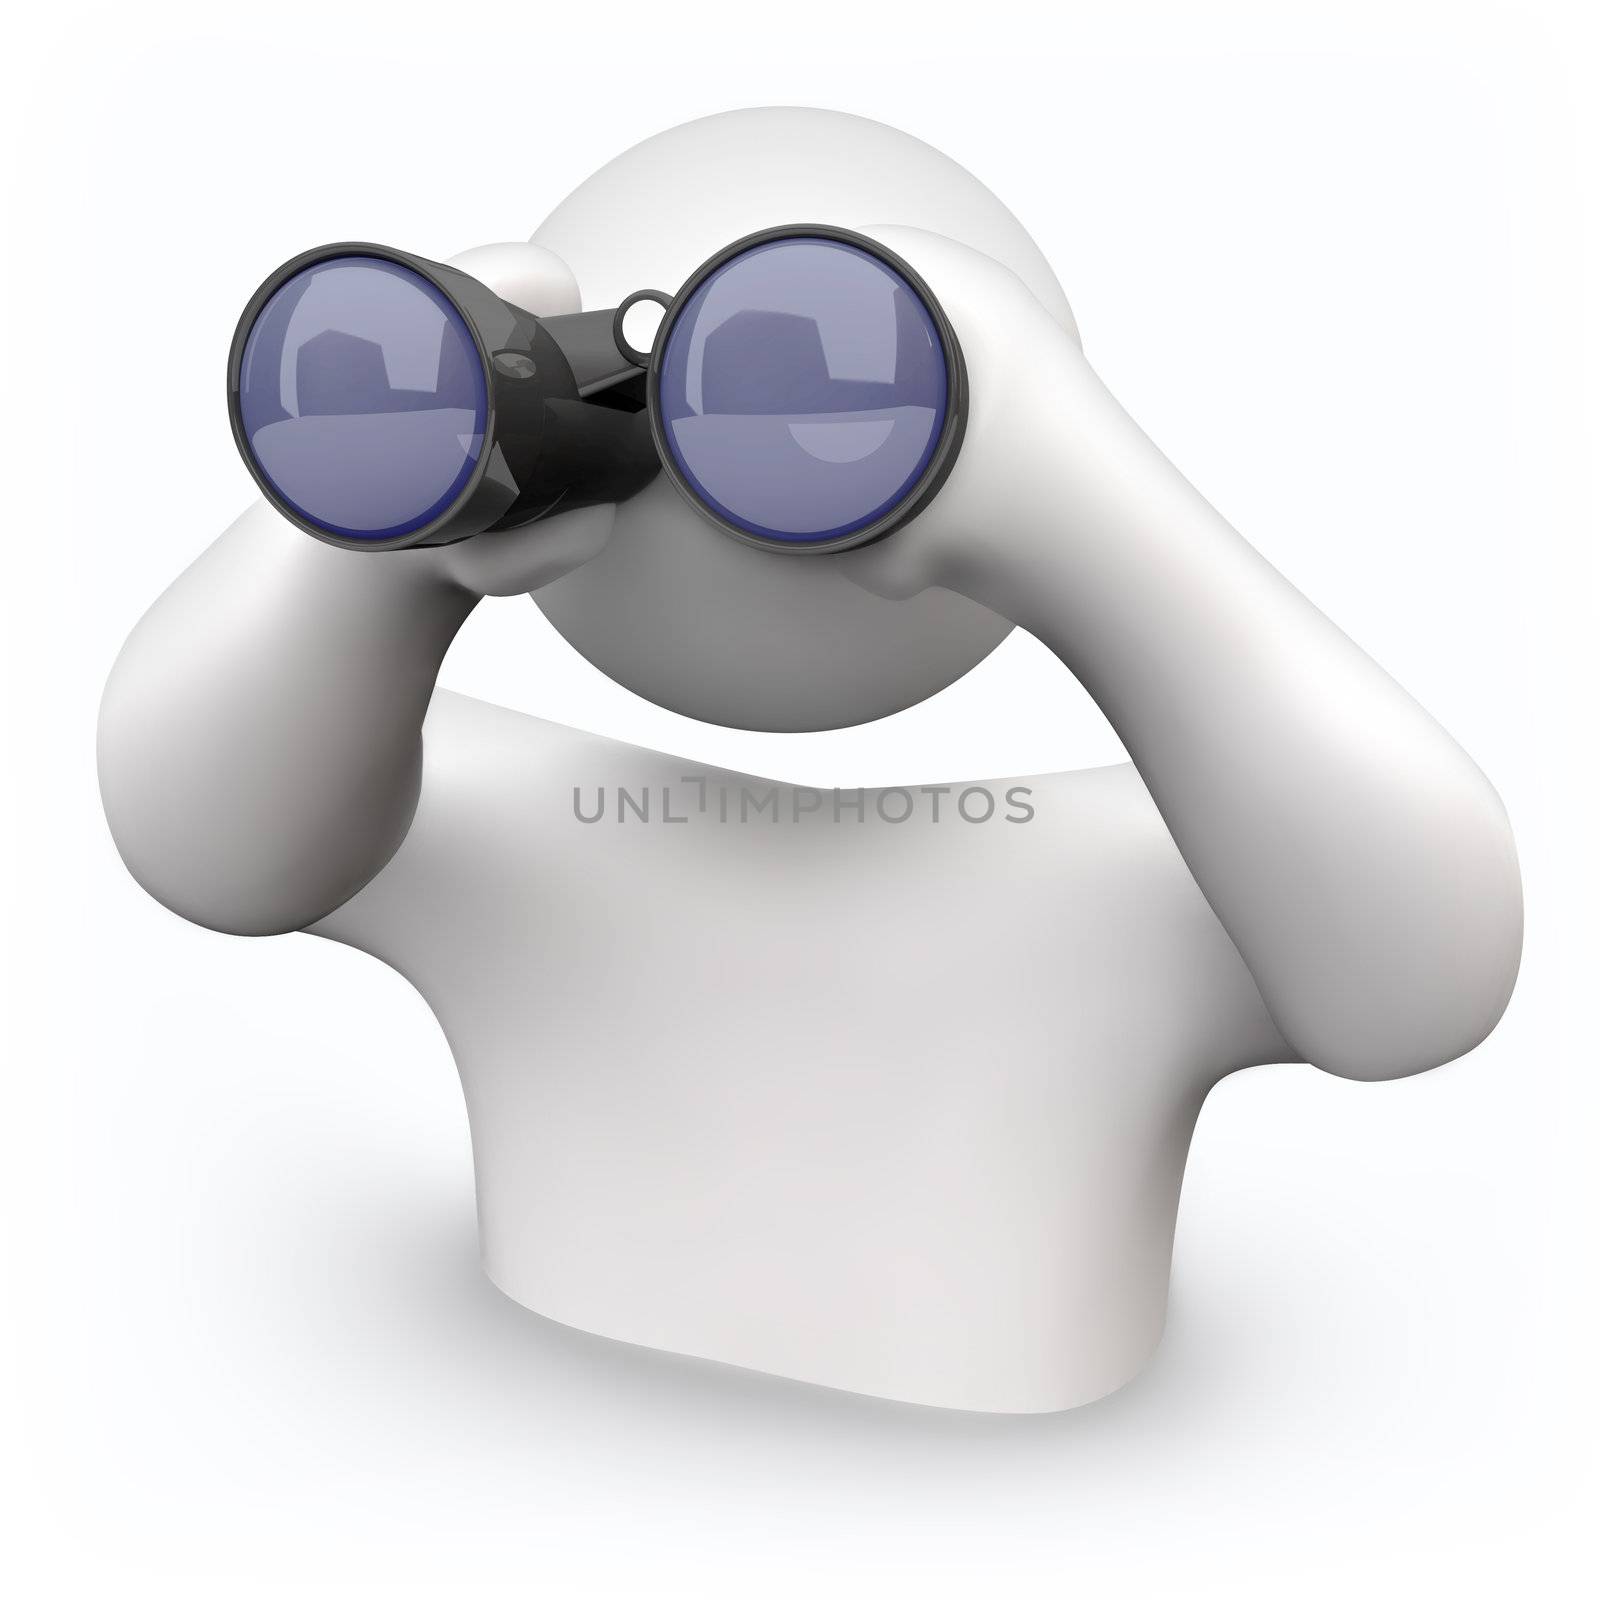 A person looks through binoculars to find answers to his questions